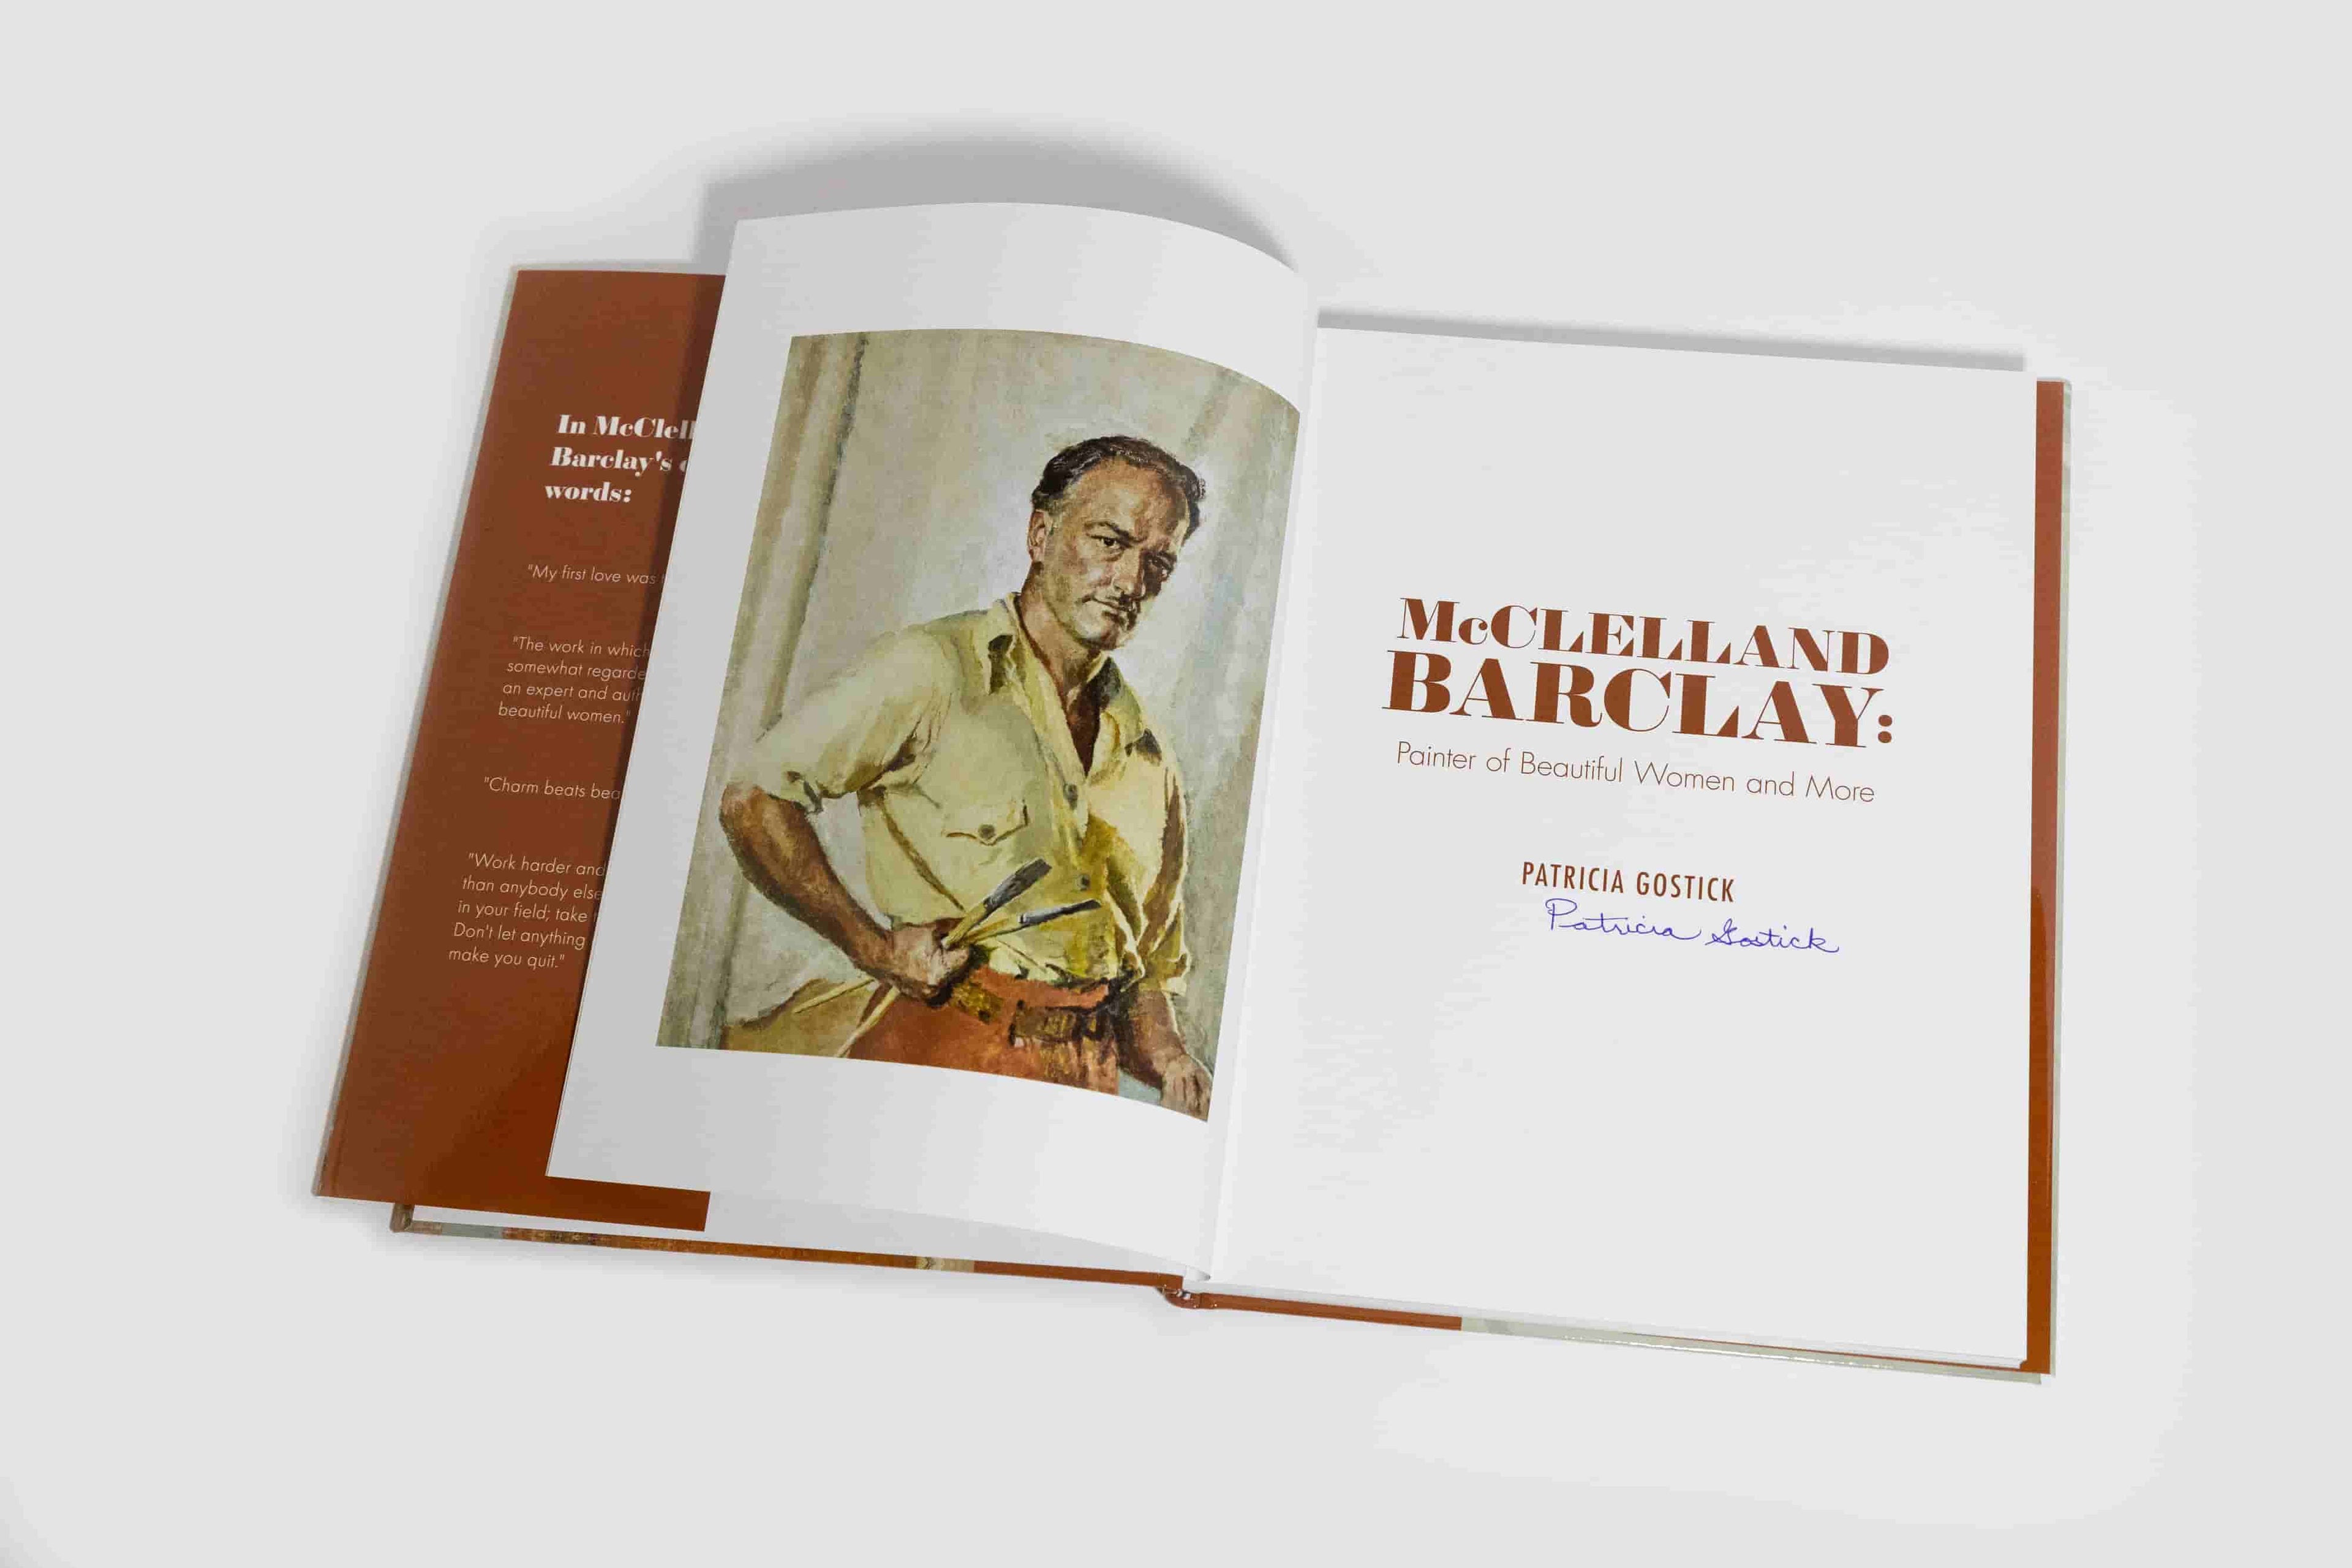 Load video: Watch a preview of the book about McClelland Barclay by Patricia Gostick